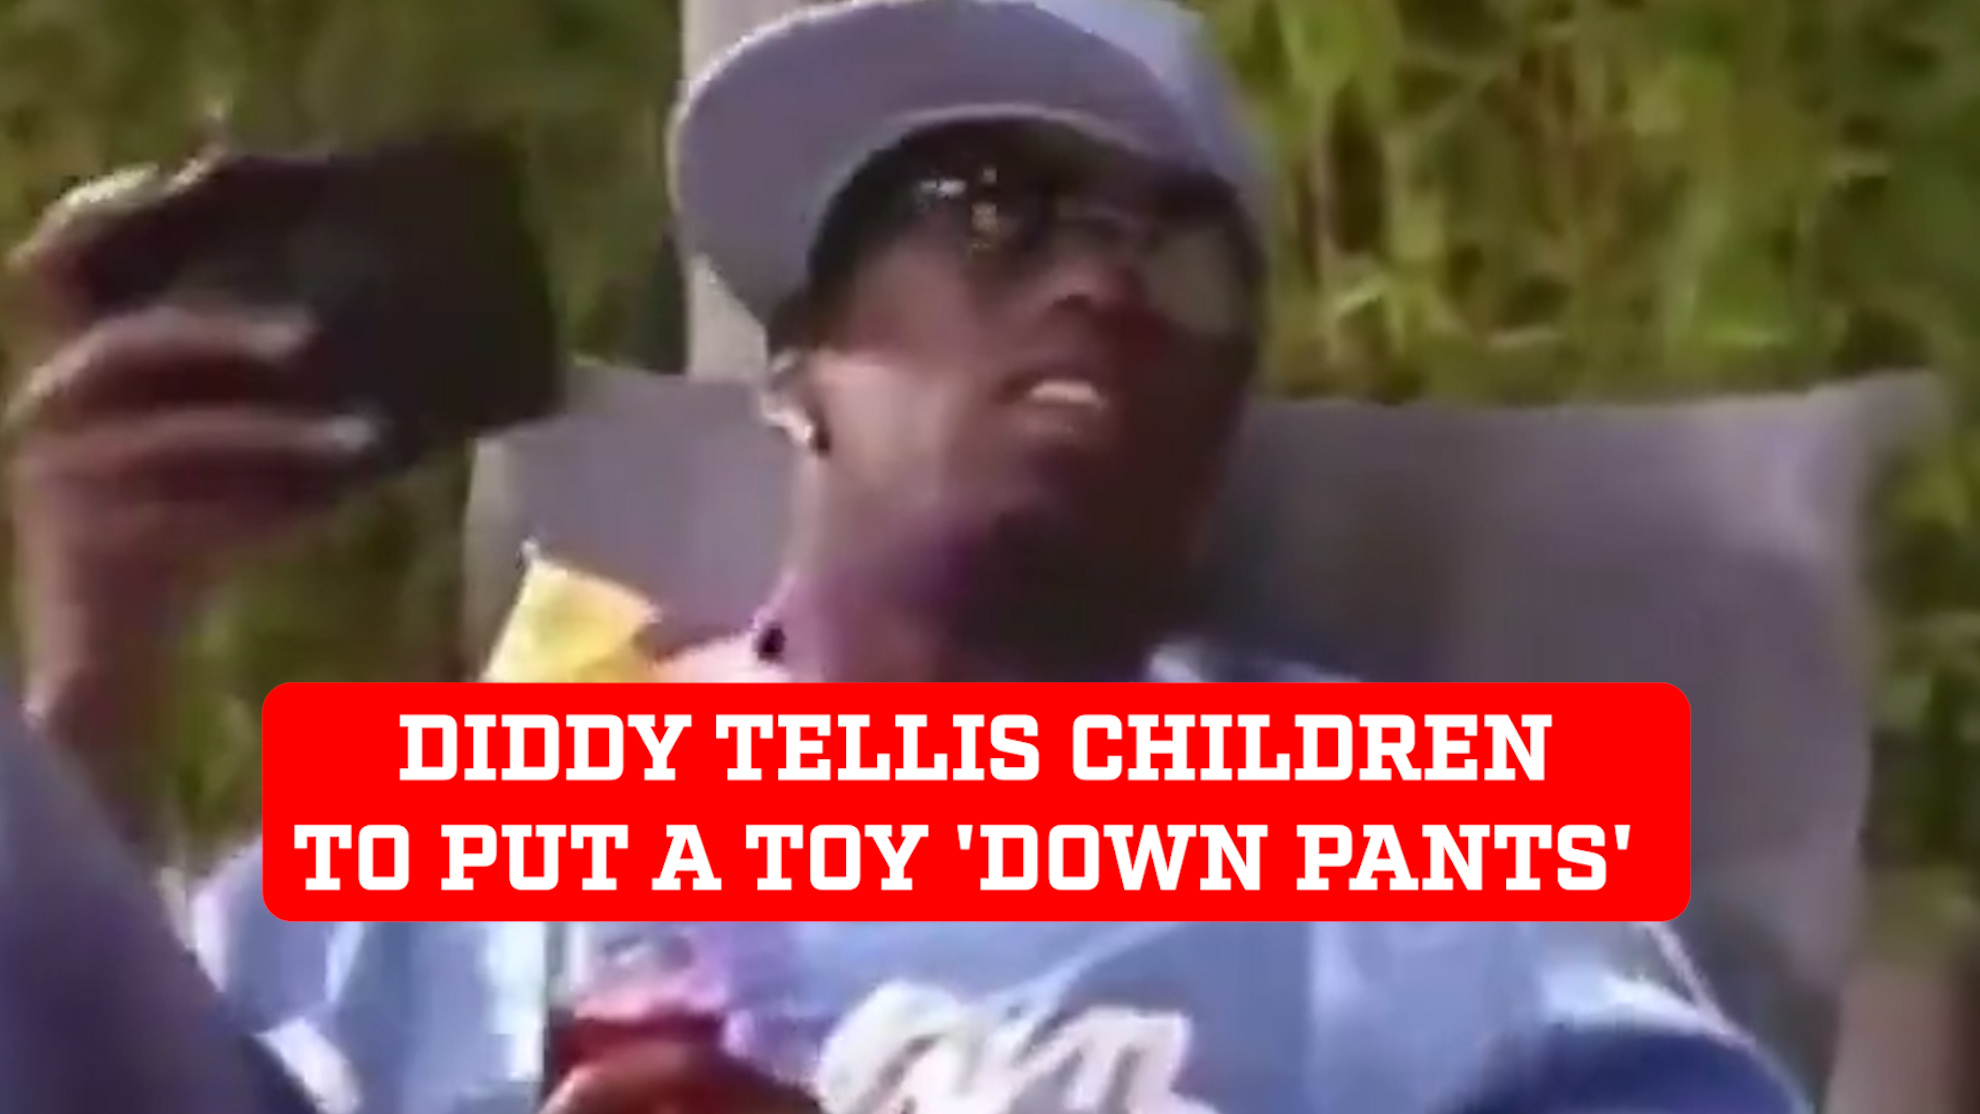 Resurfaced video of Diddys instructions to children to put toy down pants raises concern